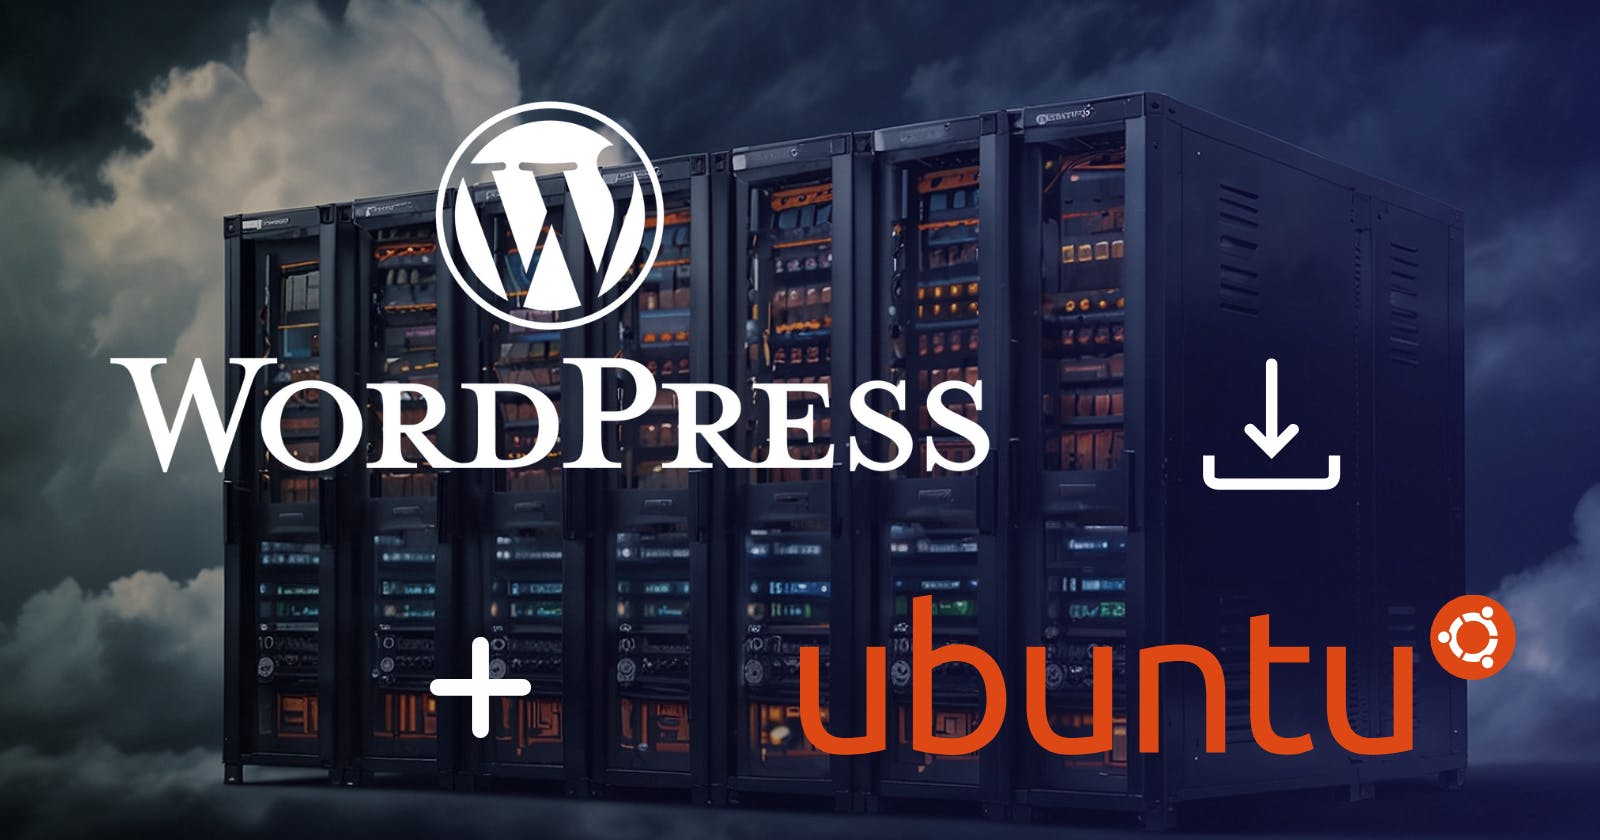 How to Install WordPress on AWS Ubuntu in less than 10 commands?